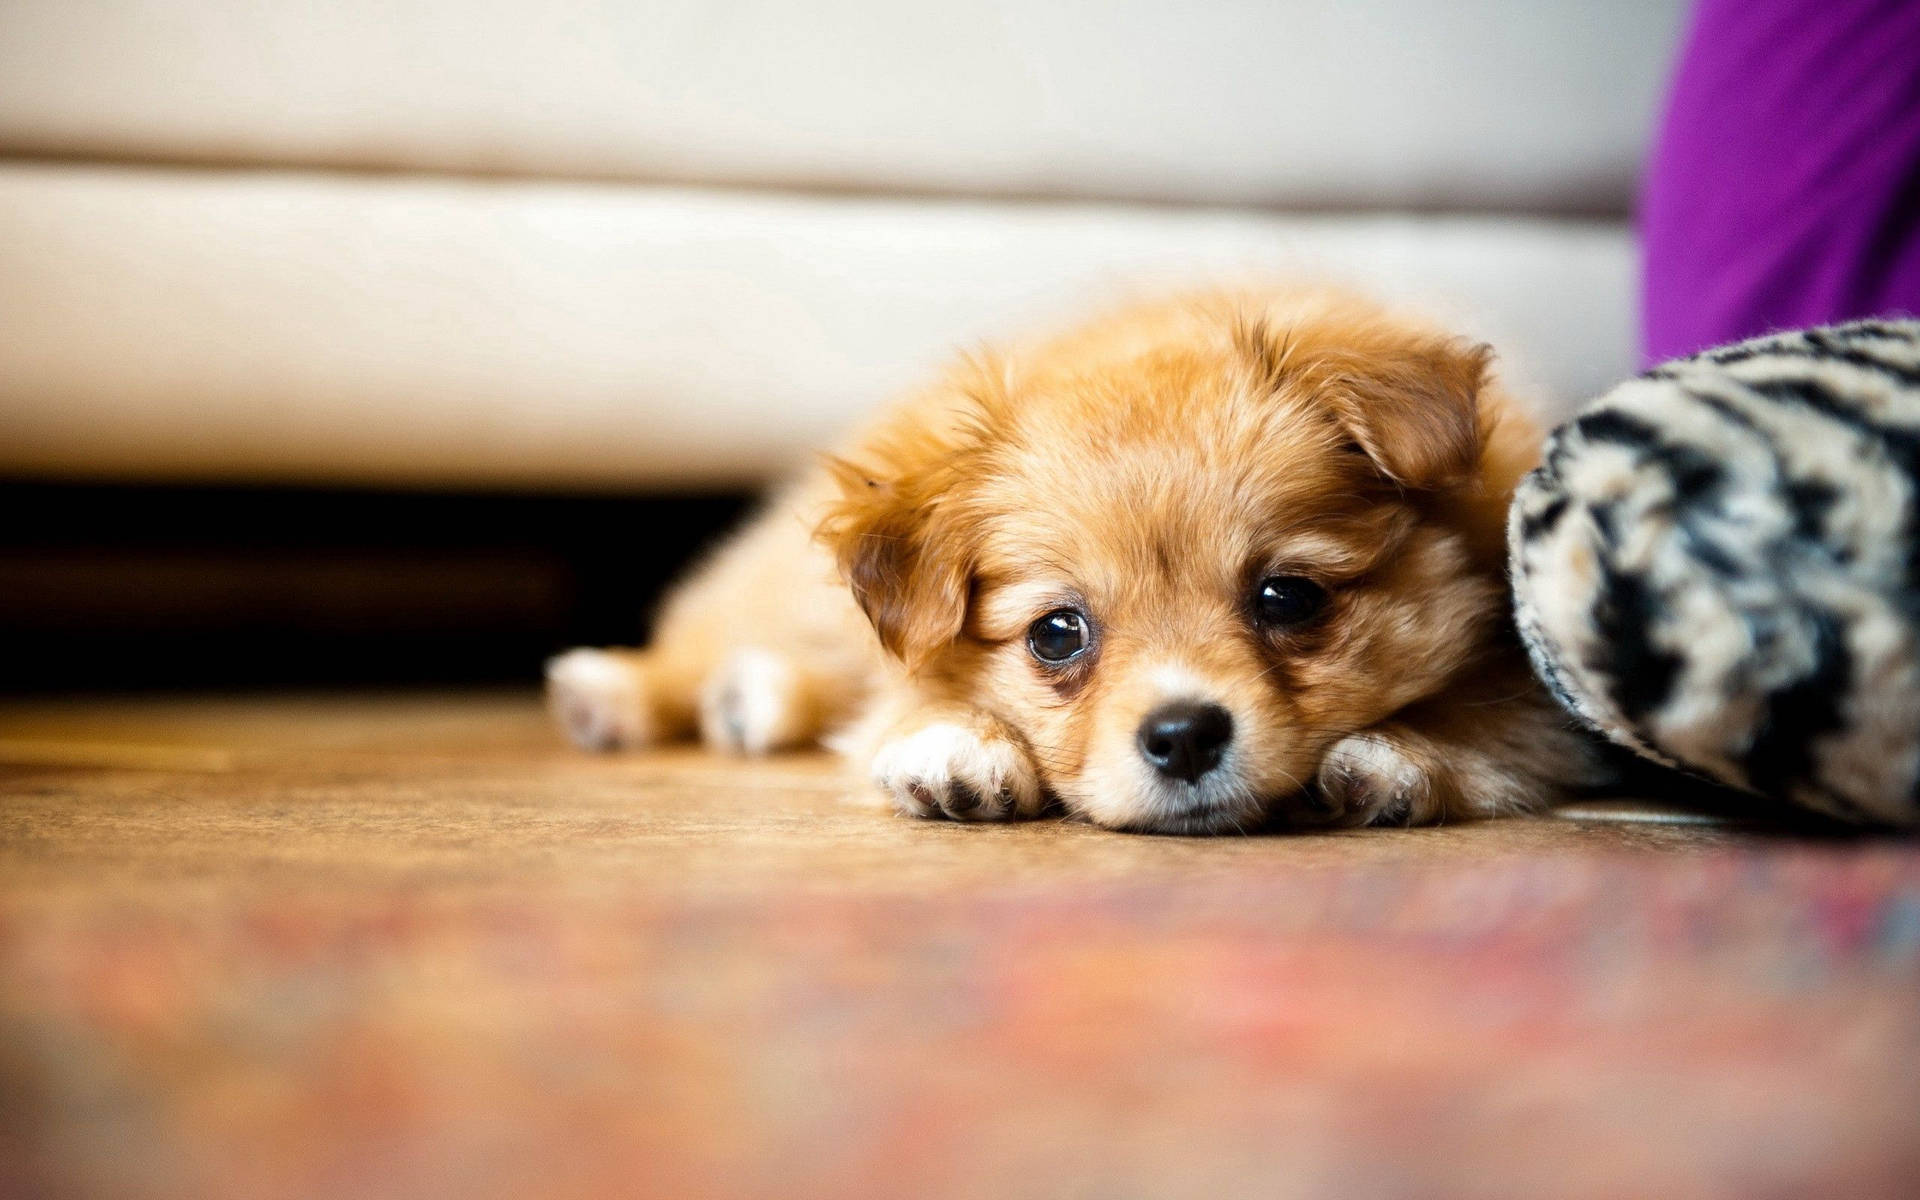 Free Cute Dog Wallpaper Downloads, [400+] Cute Dog Wallpapers for FREE |  